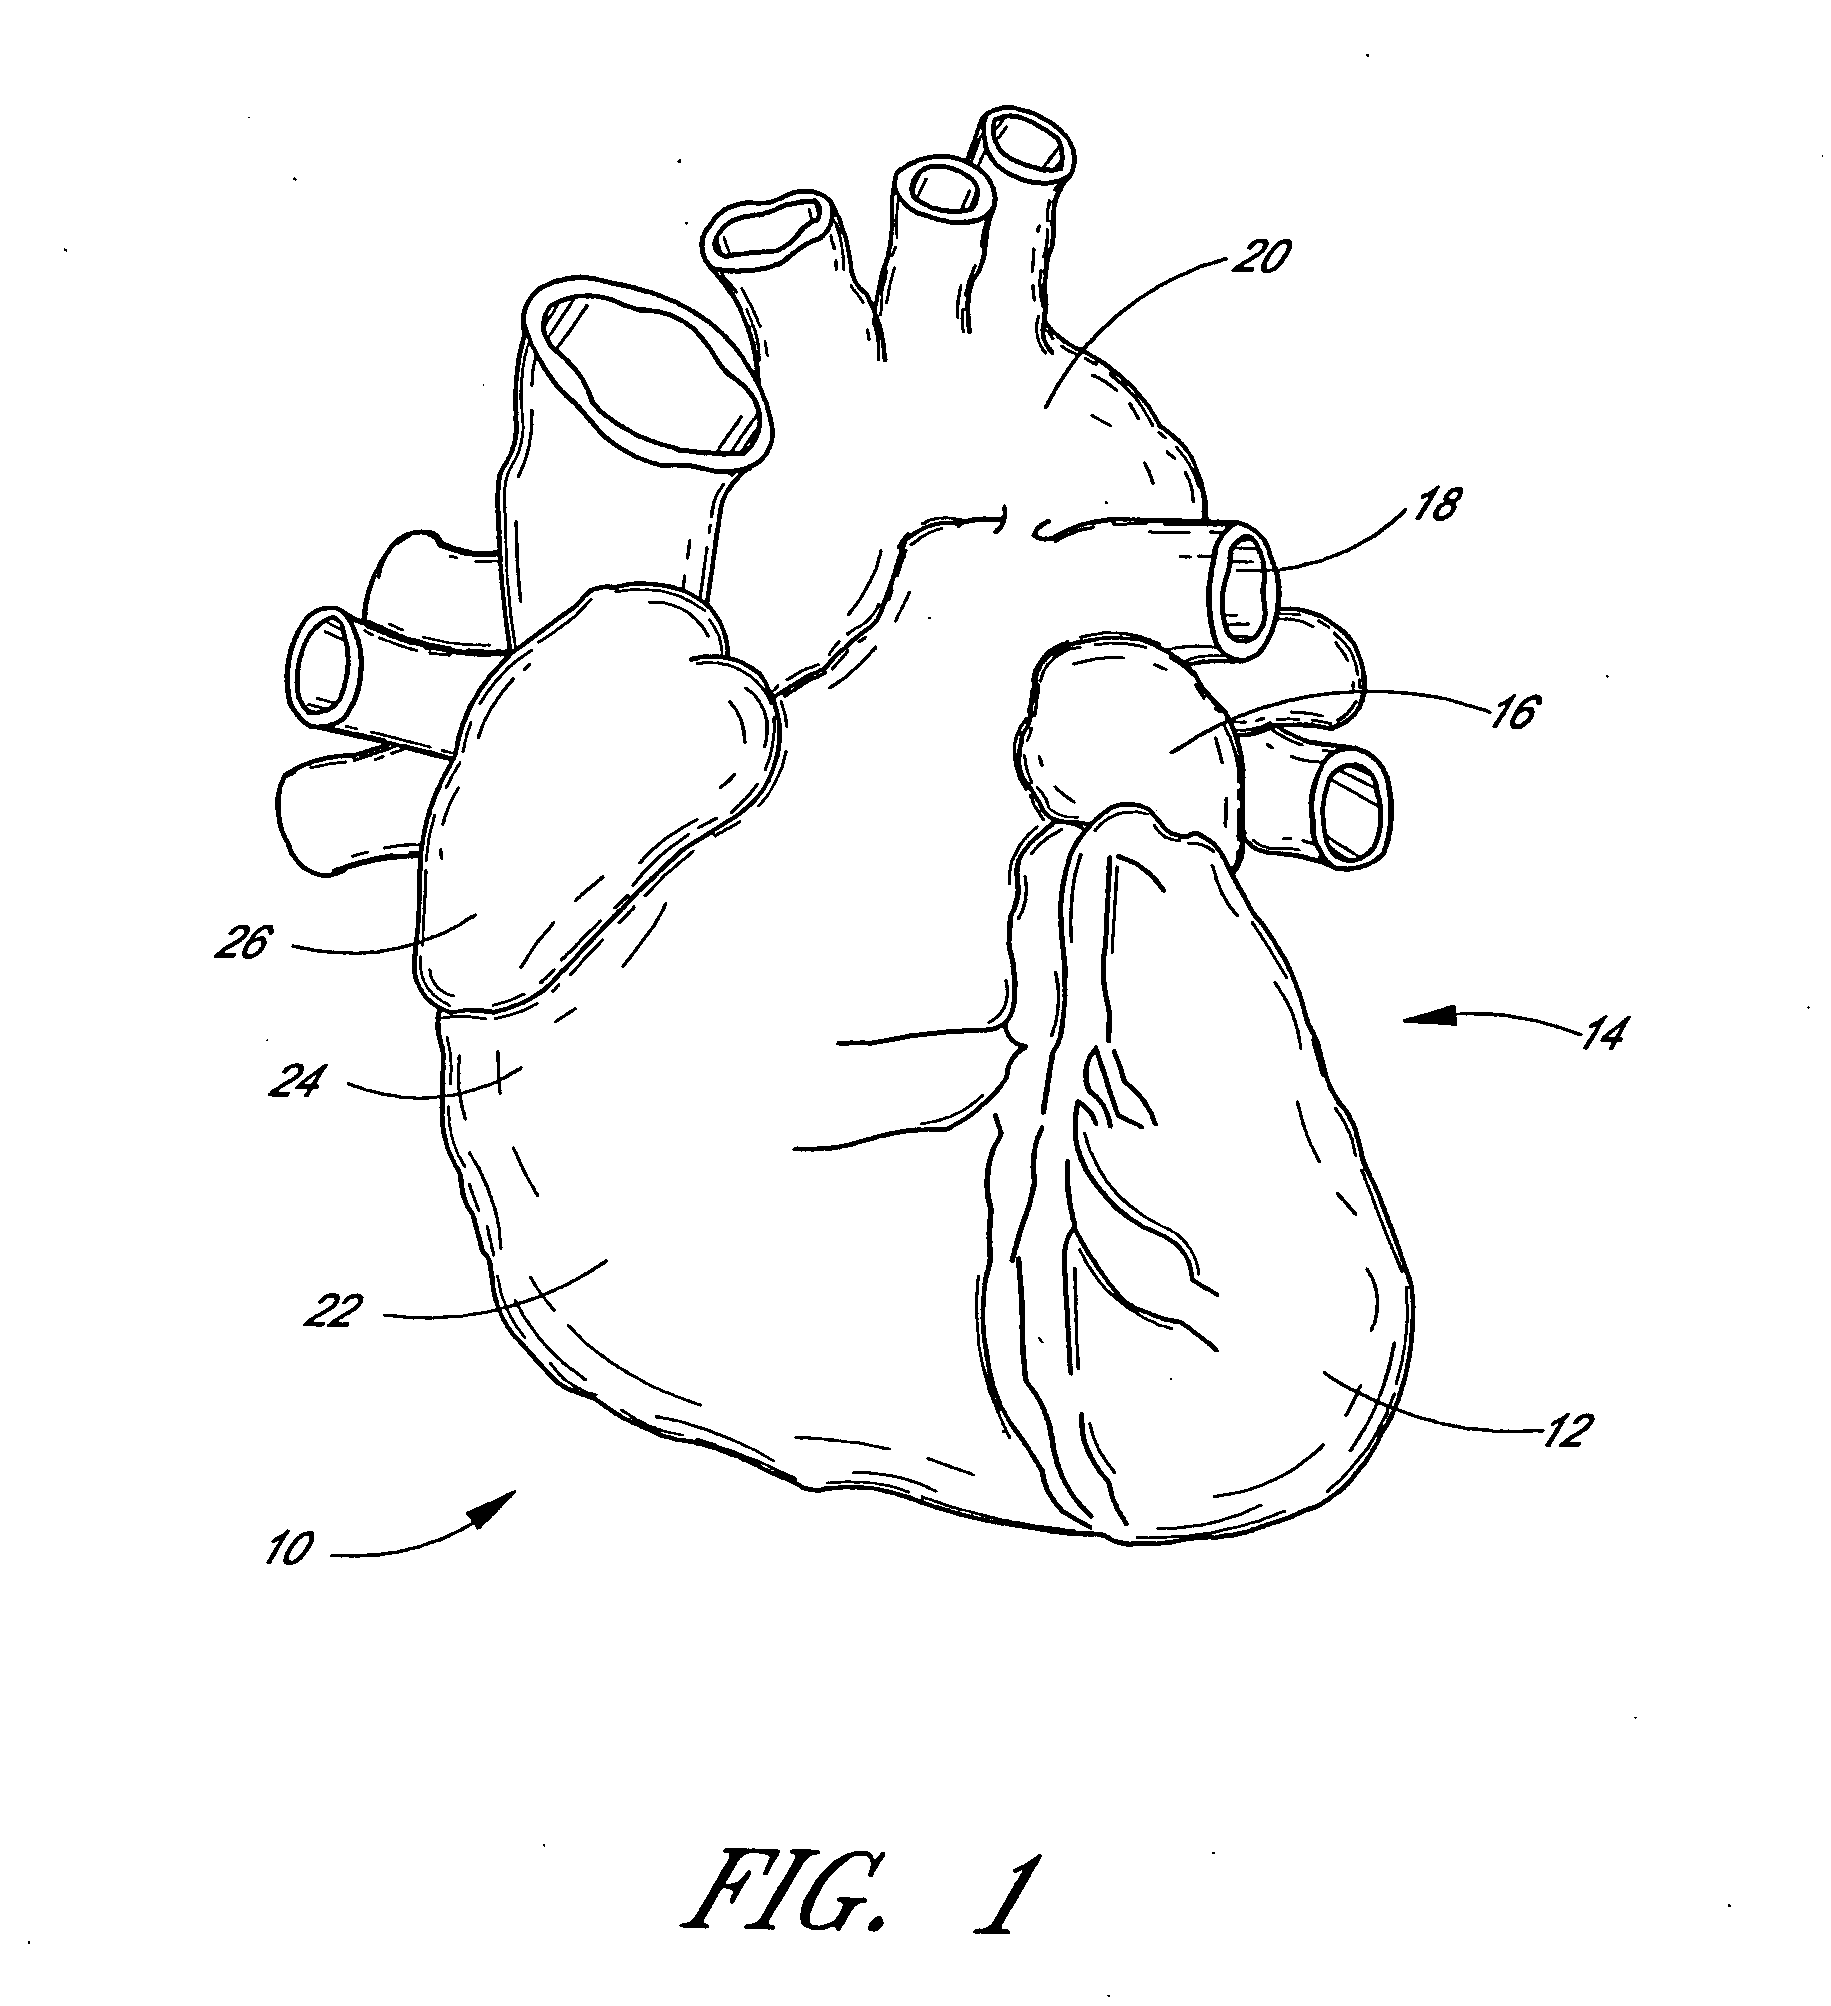 Method of closing an opening in a wall of the heart